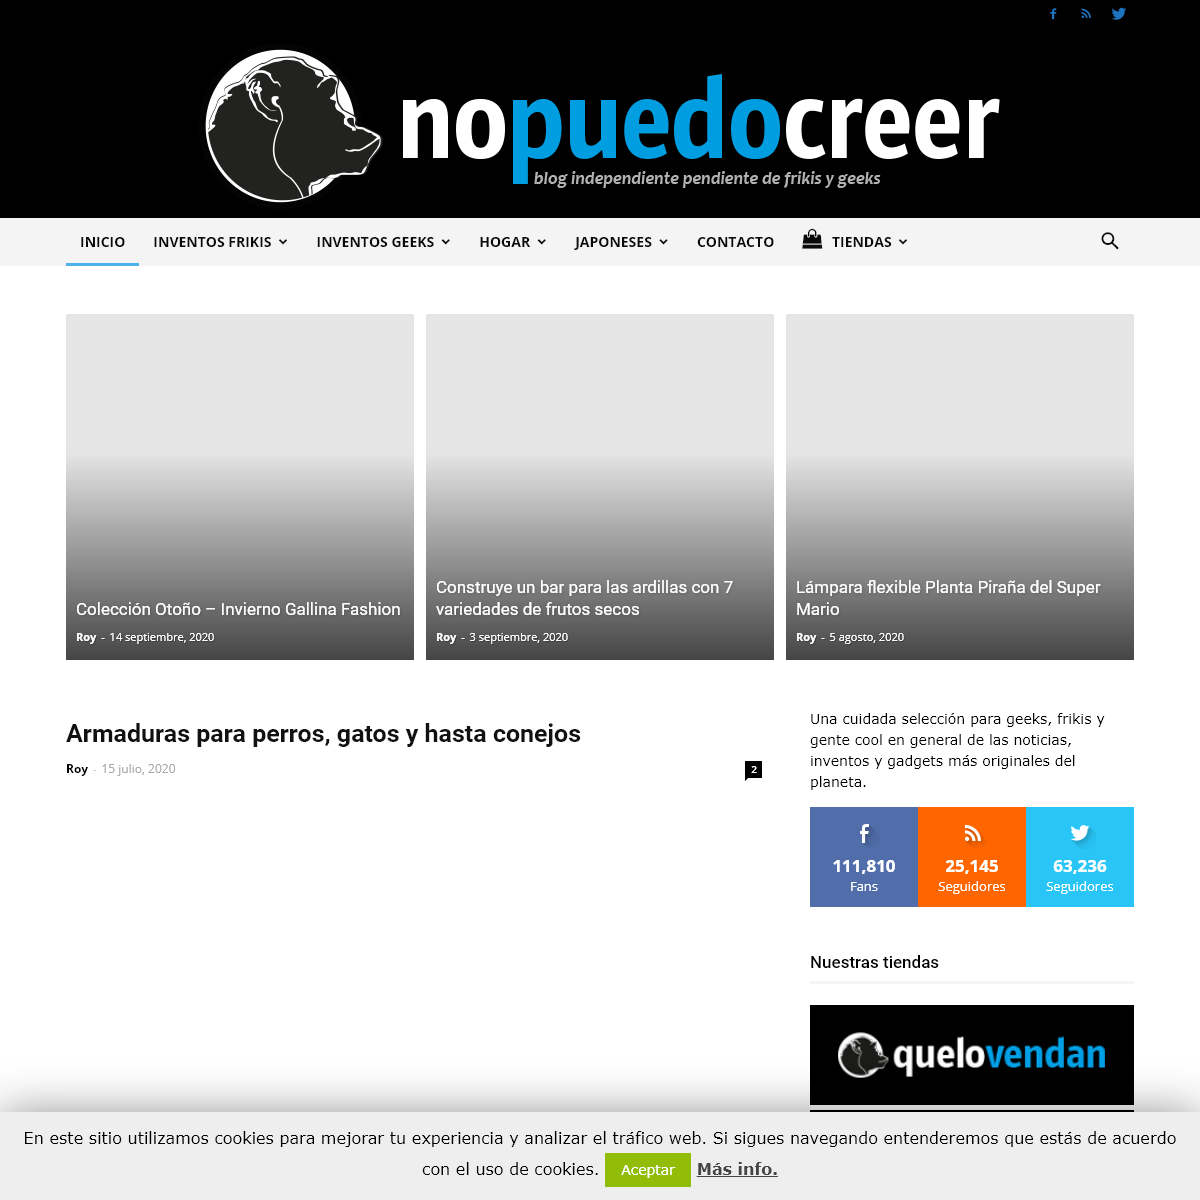 A complete backup of nopuedocreer.com